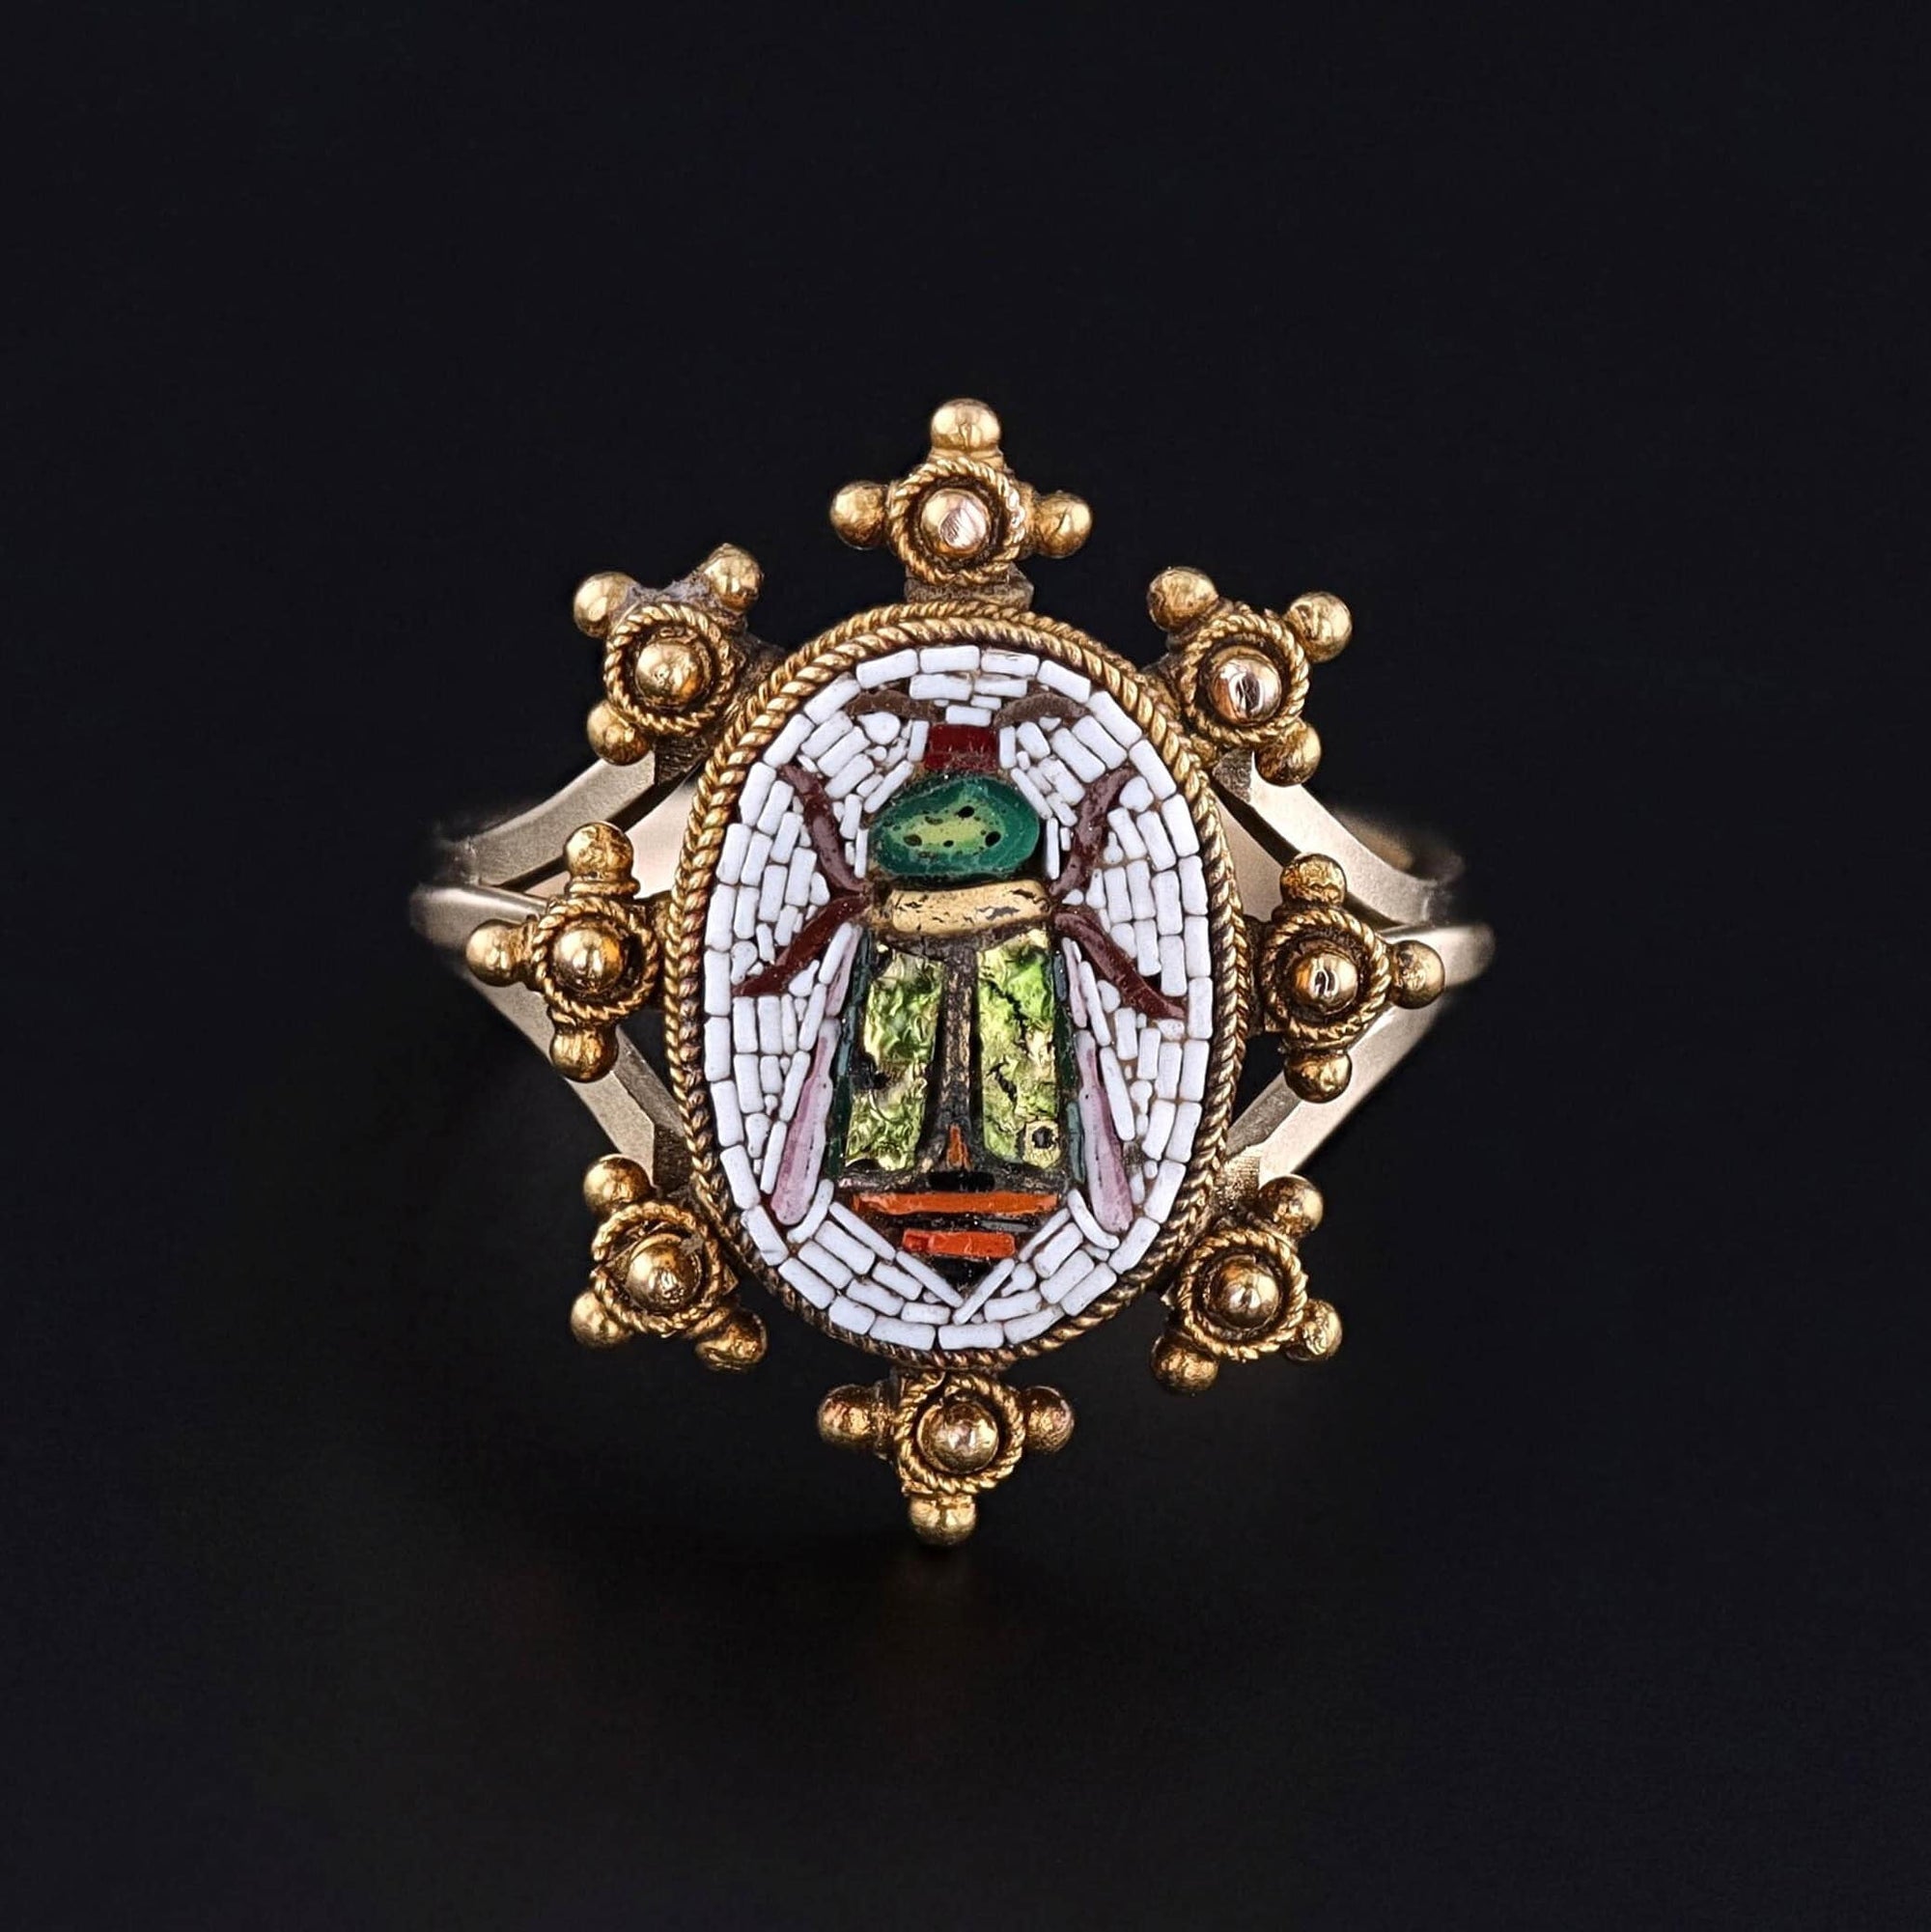 A fine micromosaic scarab ring crafted from hand-set glass tesserae, elegantly set in 14k gold. Repurposed from an antique pin dating back to 1880, our jeweler added a custom 14k gold mounting. A perfect treasure for any antique jewelry collector